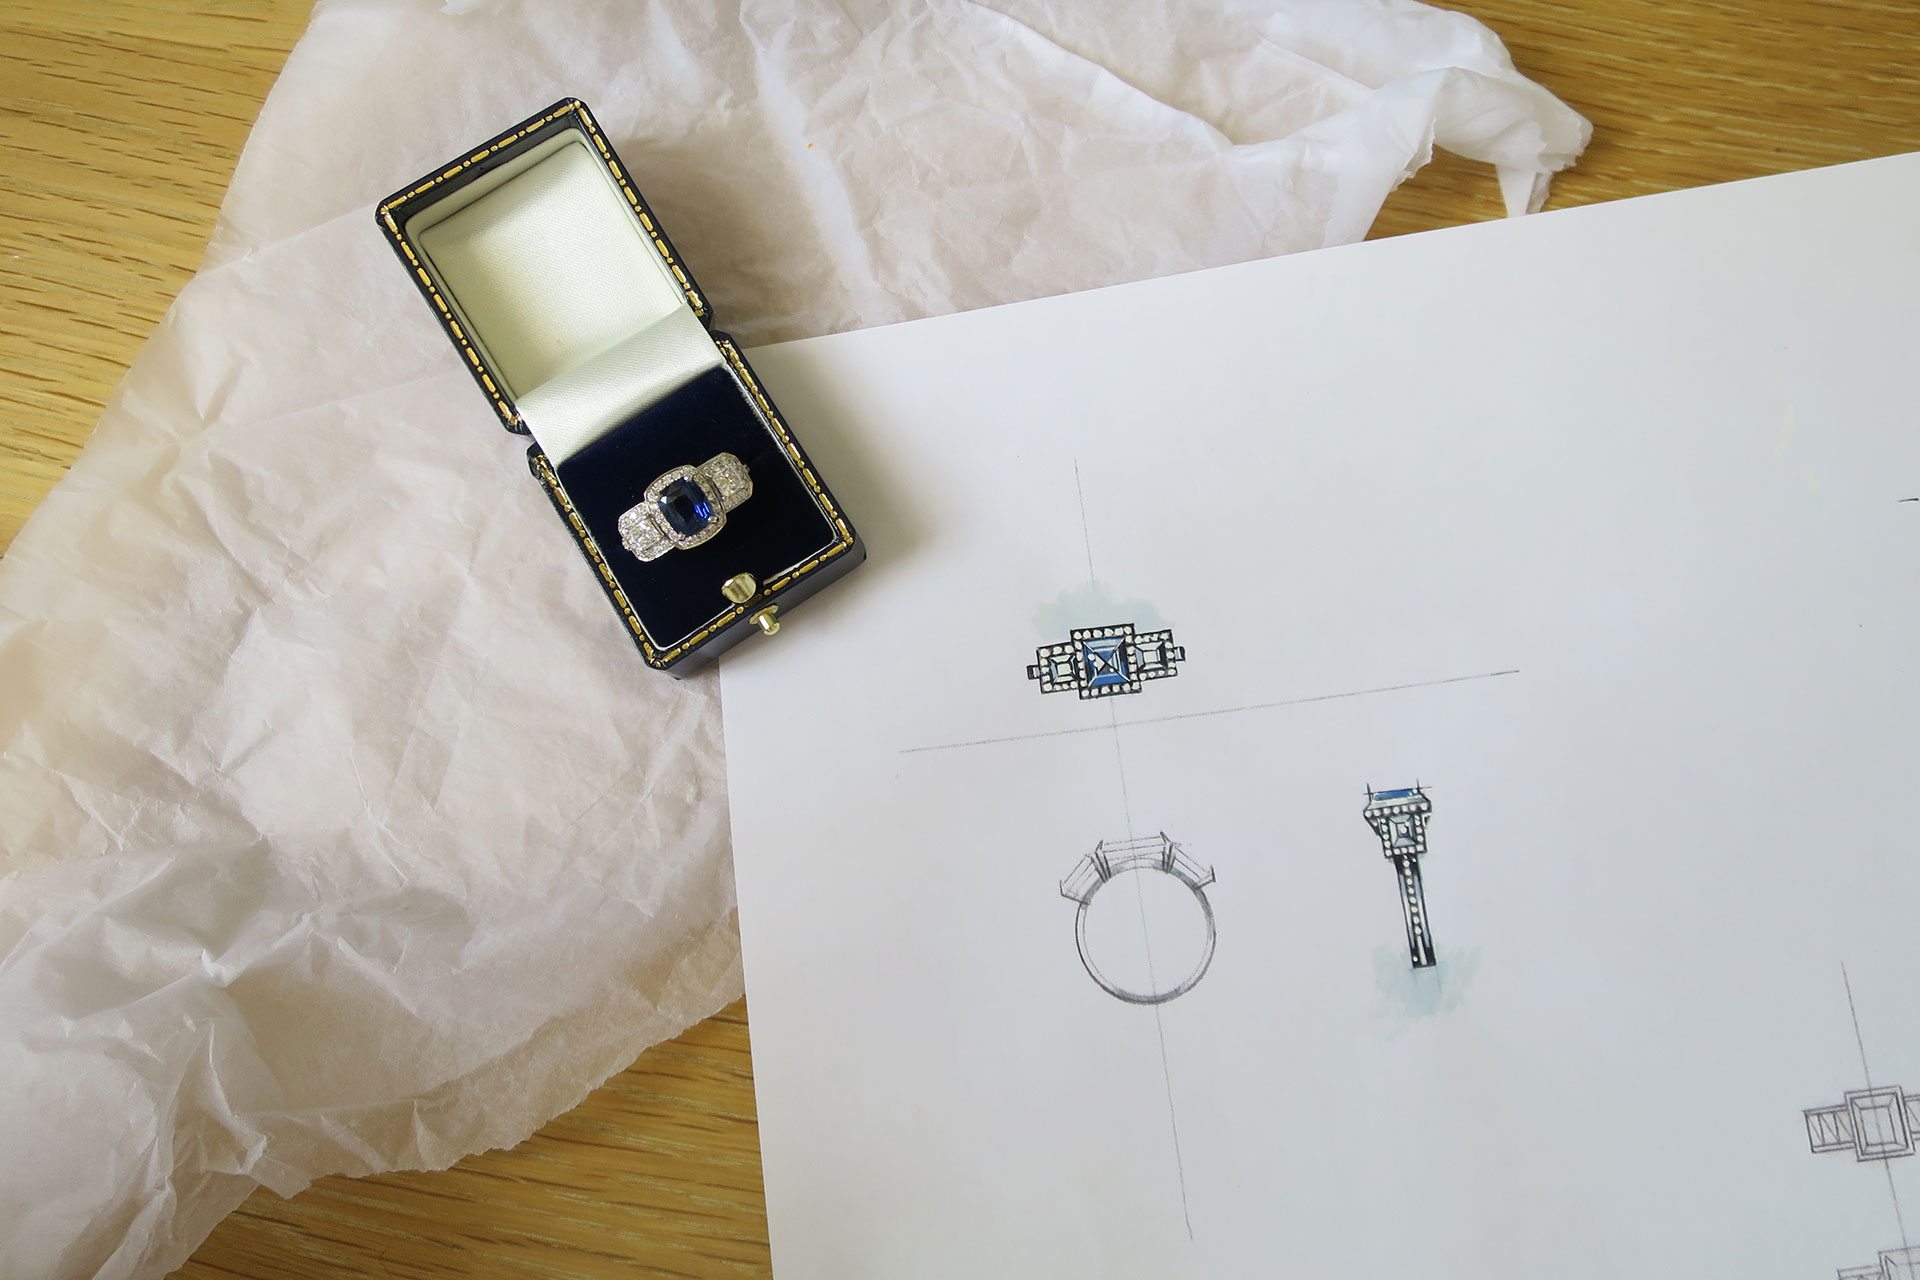 How to Buy a Bespoke Engagement Ring According to Industry Experts